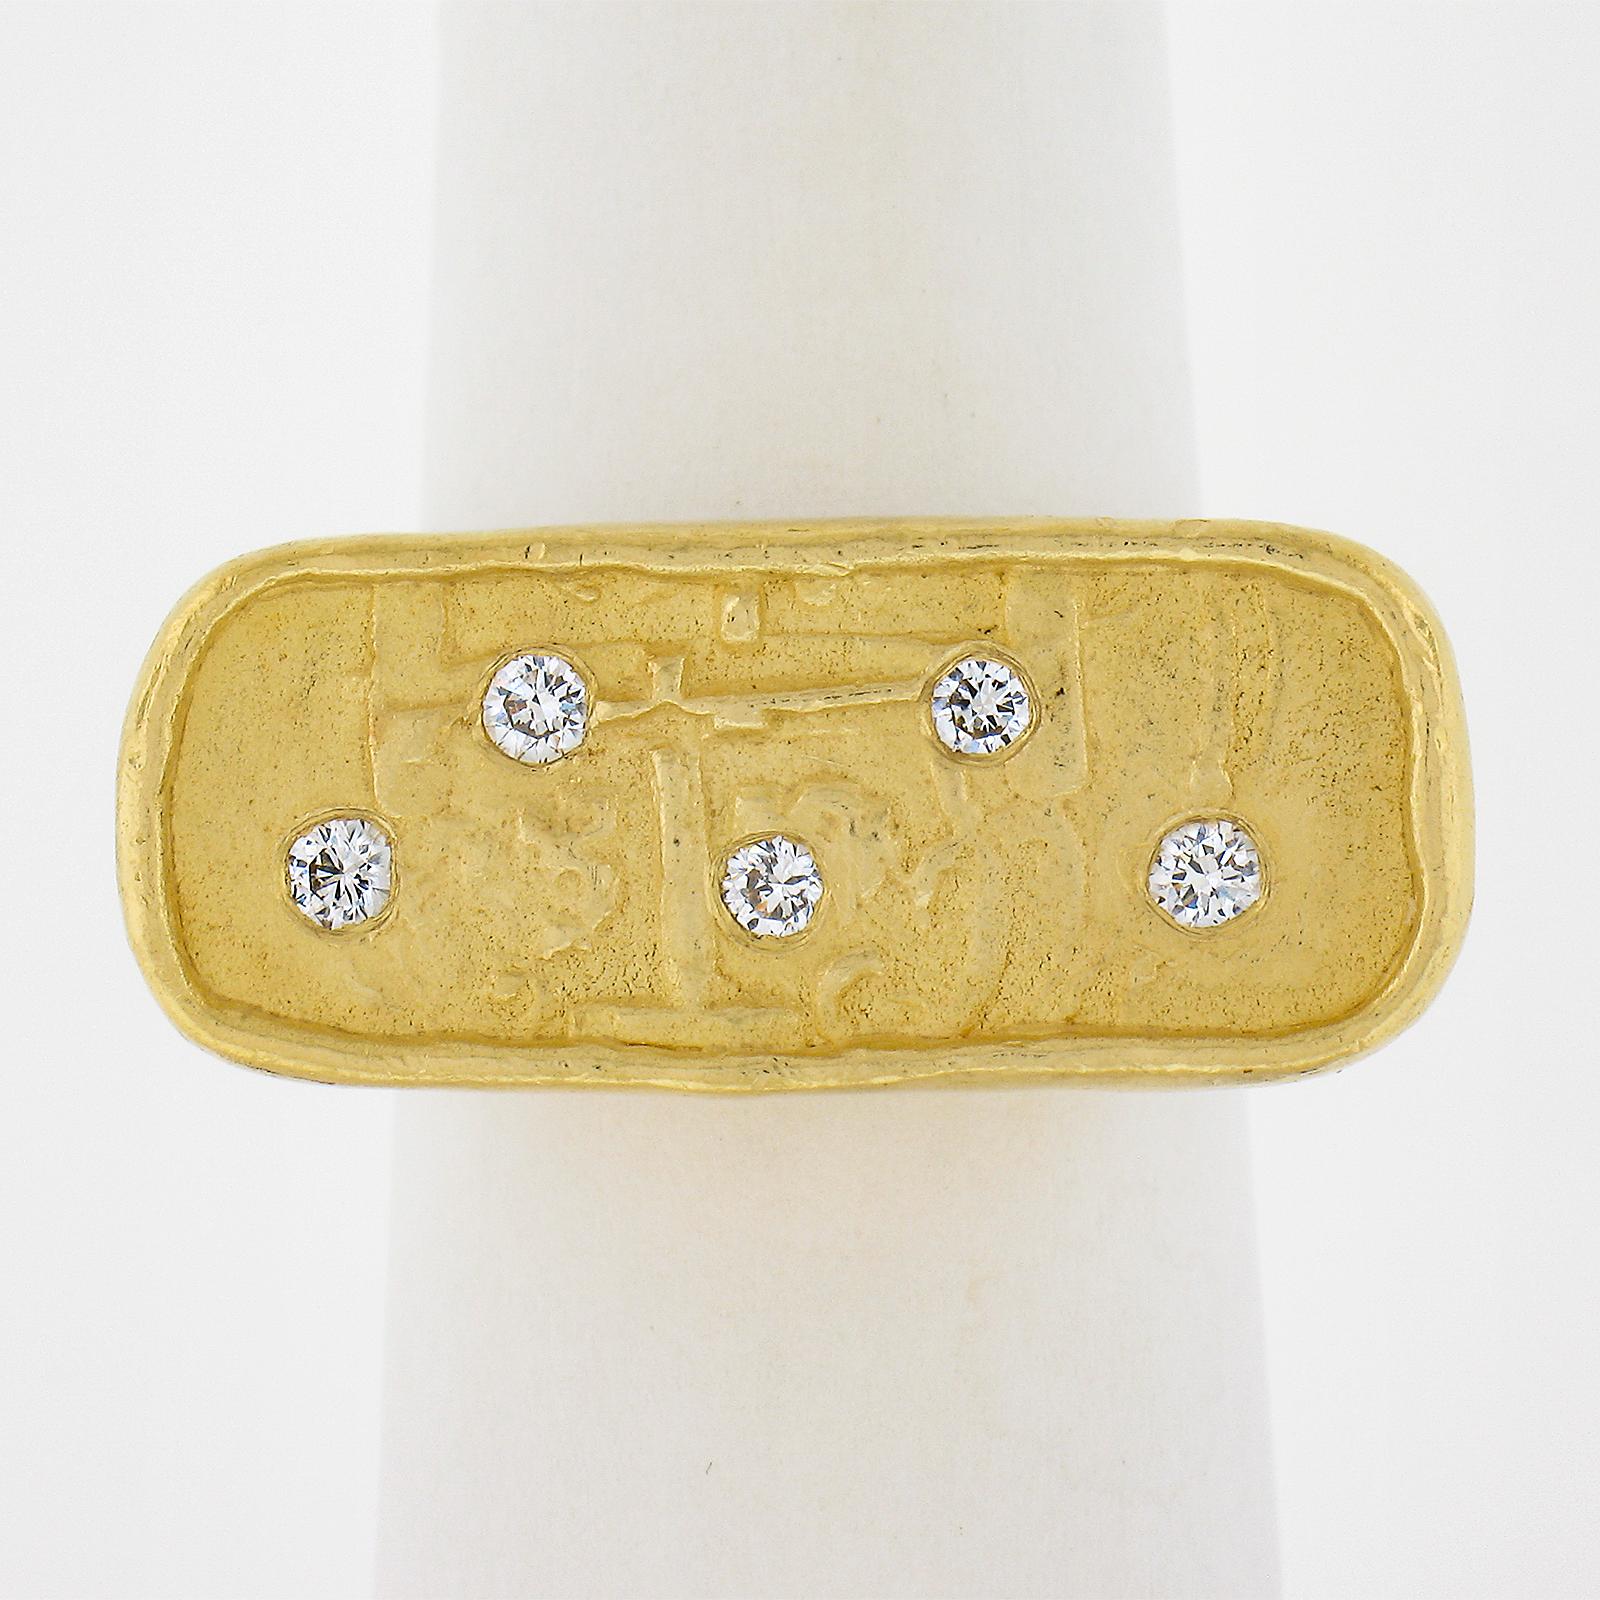 --Stone(s):--
(5) Natural Genuine Diamonds - Round Brilliant Cut - Burnish/Flush Set - F/G Color - VS1/VS2 w/ 1 SI1 Clarity - 0.20ctw (approx.)

Material: Solid 22k Yellow Gold
Weight: 27.39 Grams
Ring Size: Will fit up to 7.0 size finger due to the